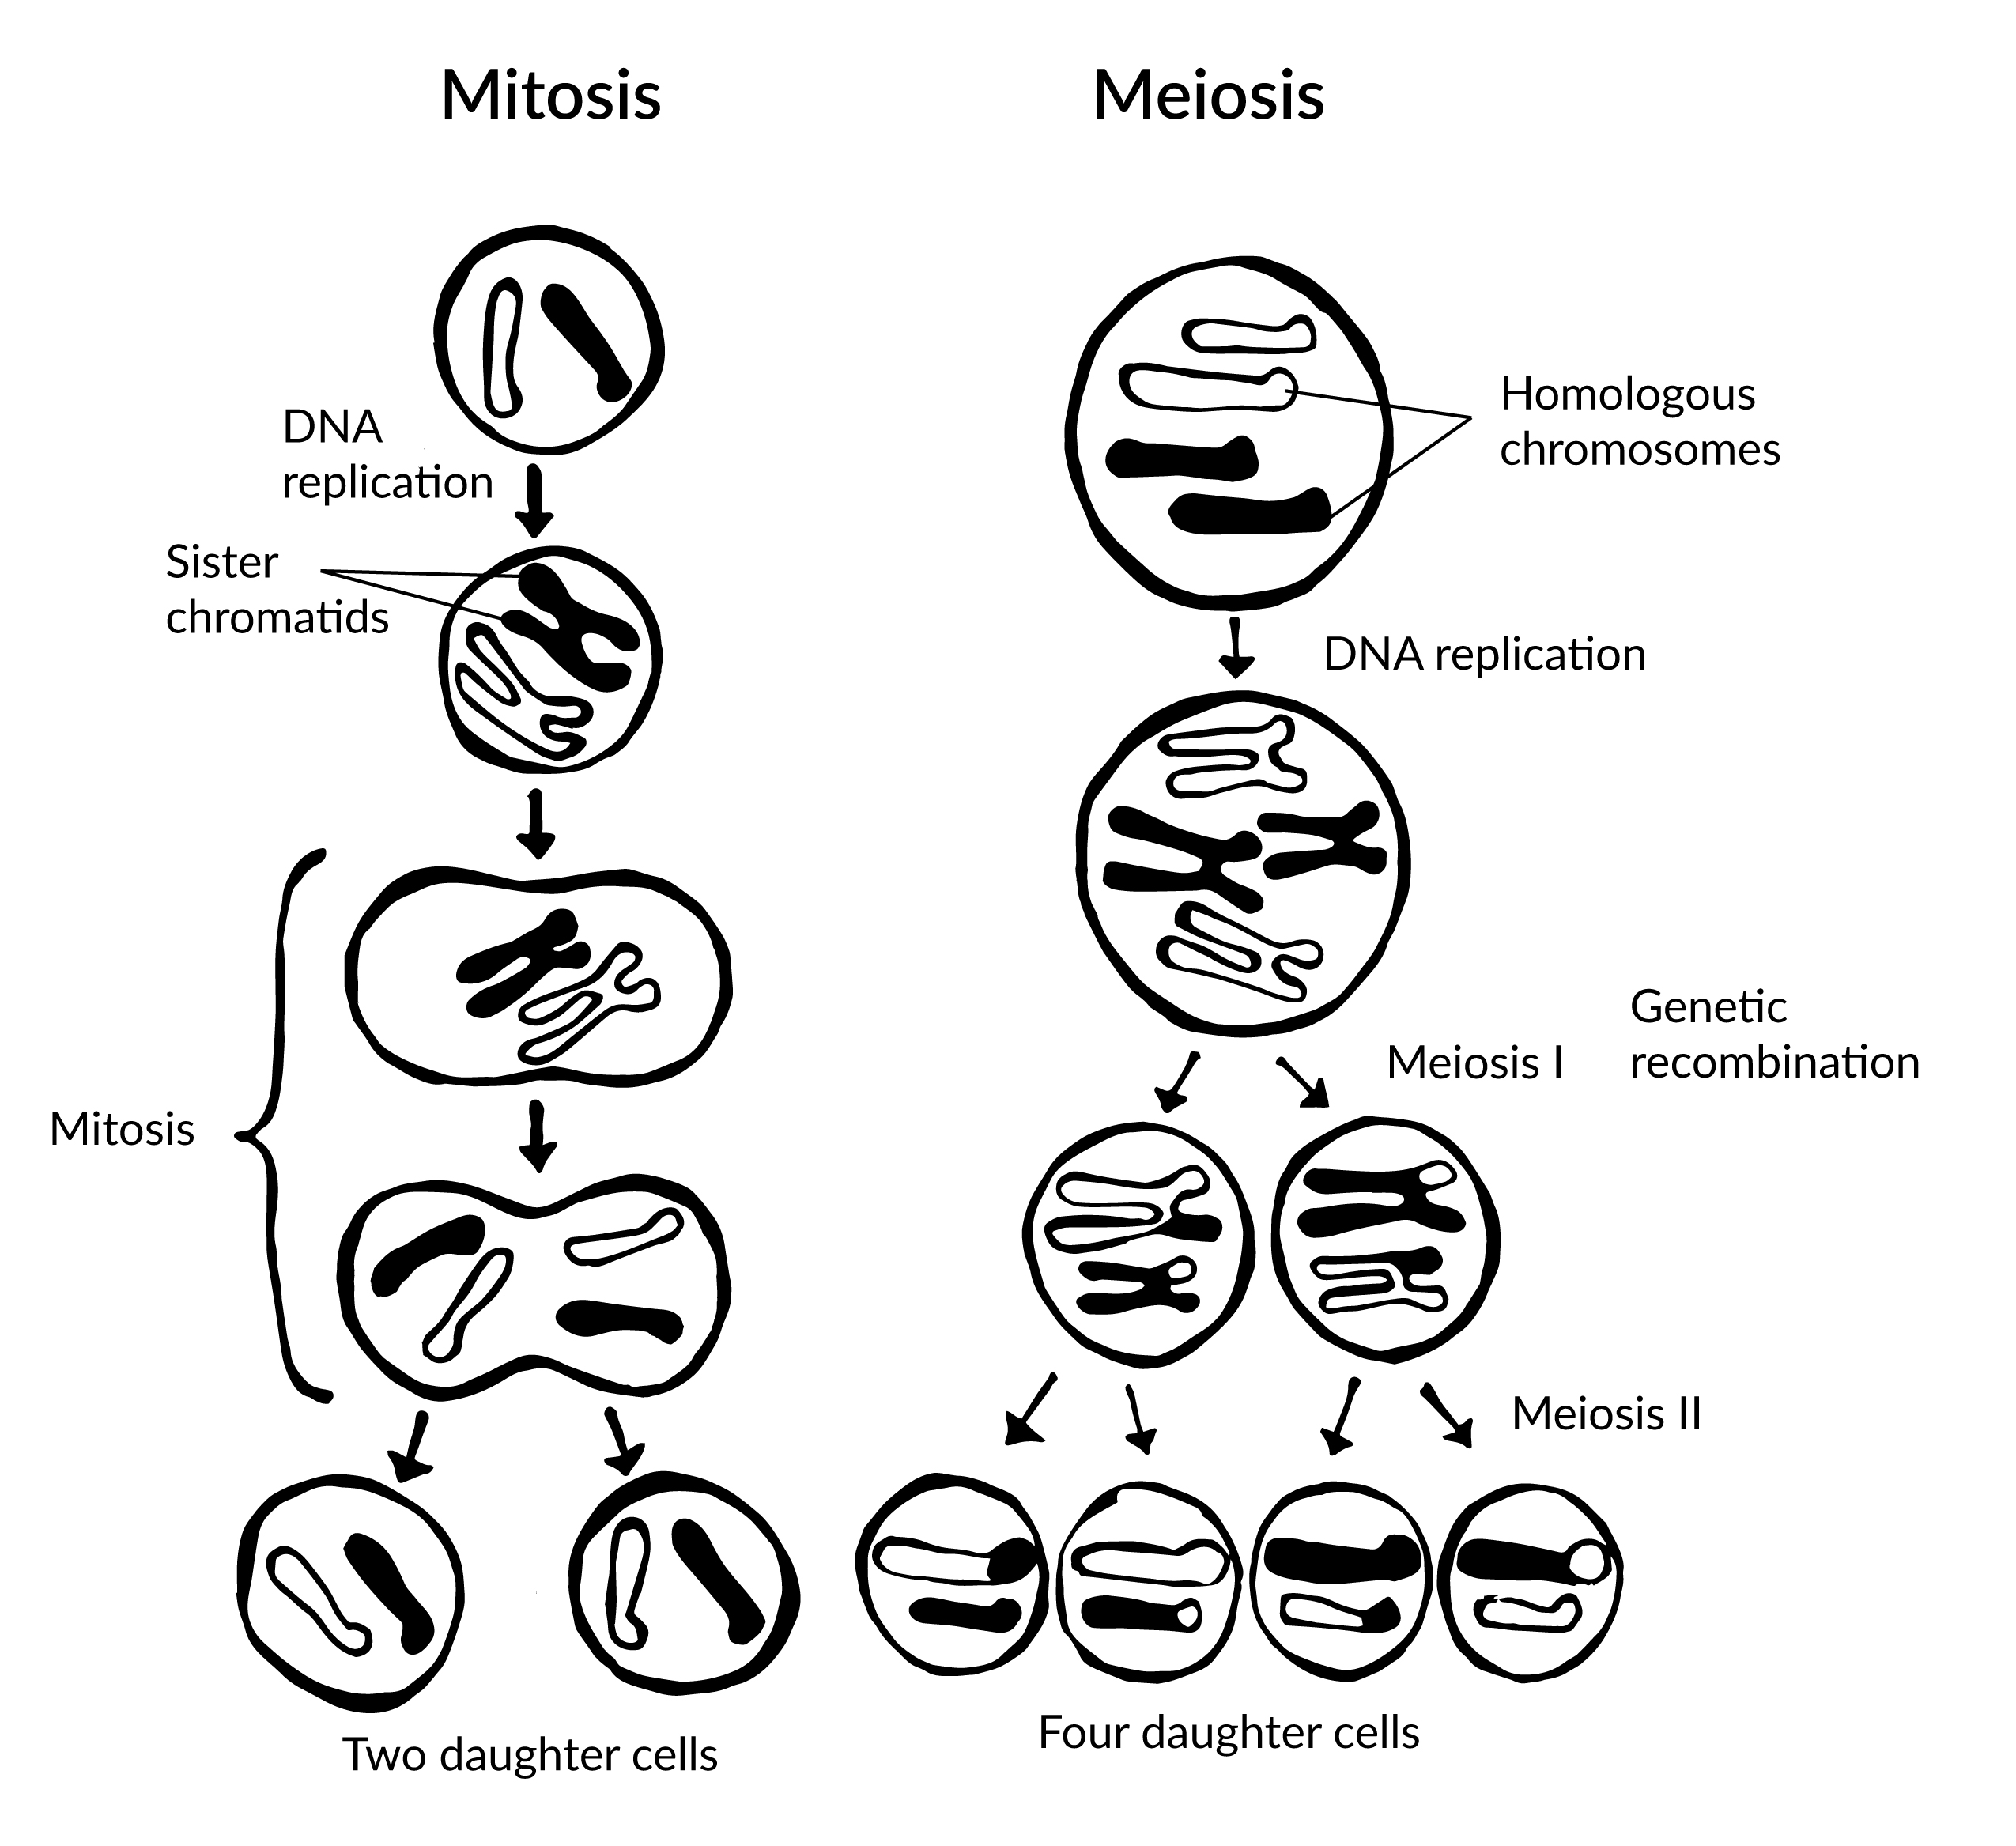 The stages of mitosis and meiosis.